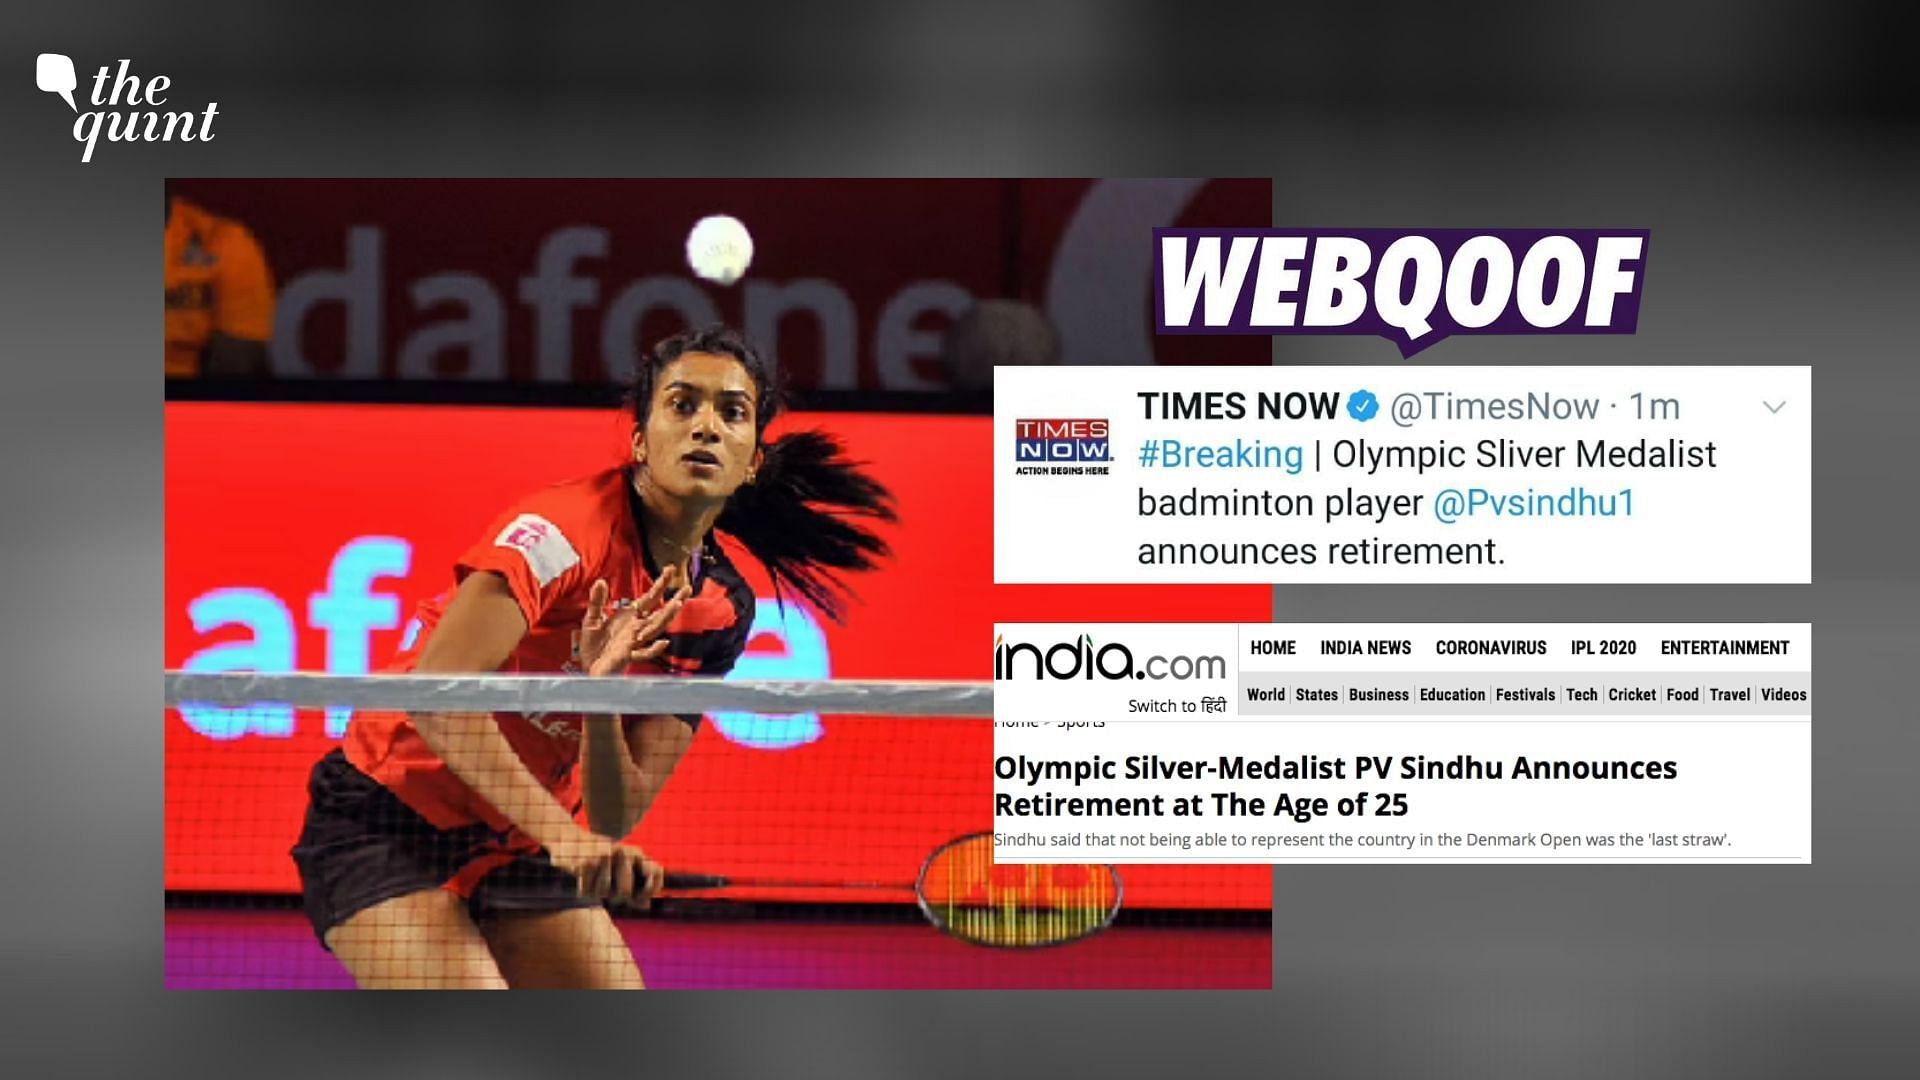 Several media outlets misreported that PV Sindhu has retired from the sport when the statement issued by her clearly mentioned that she will be back at the Asia Open.